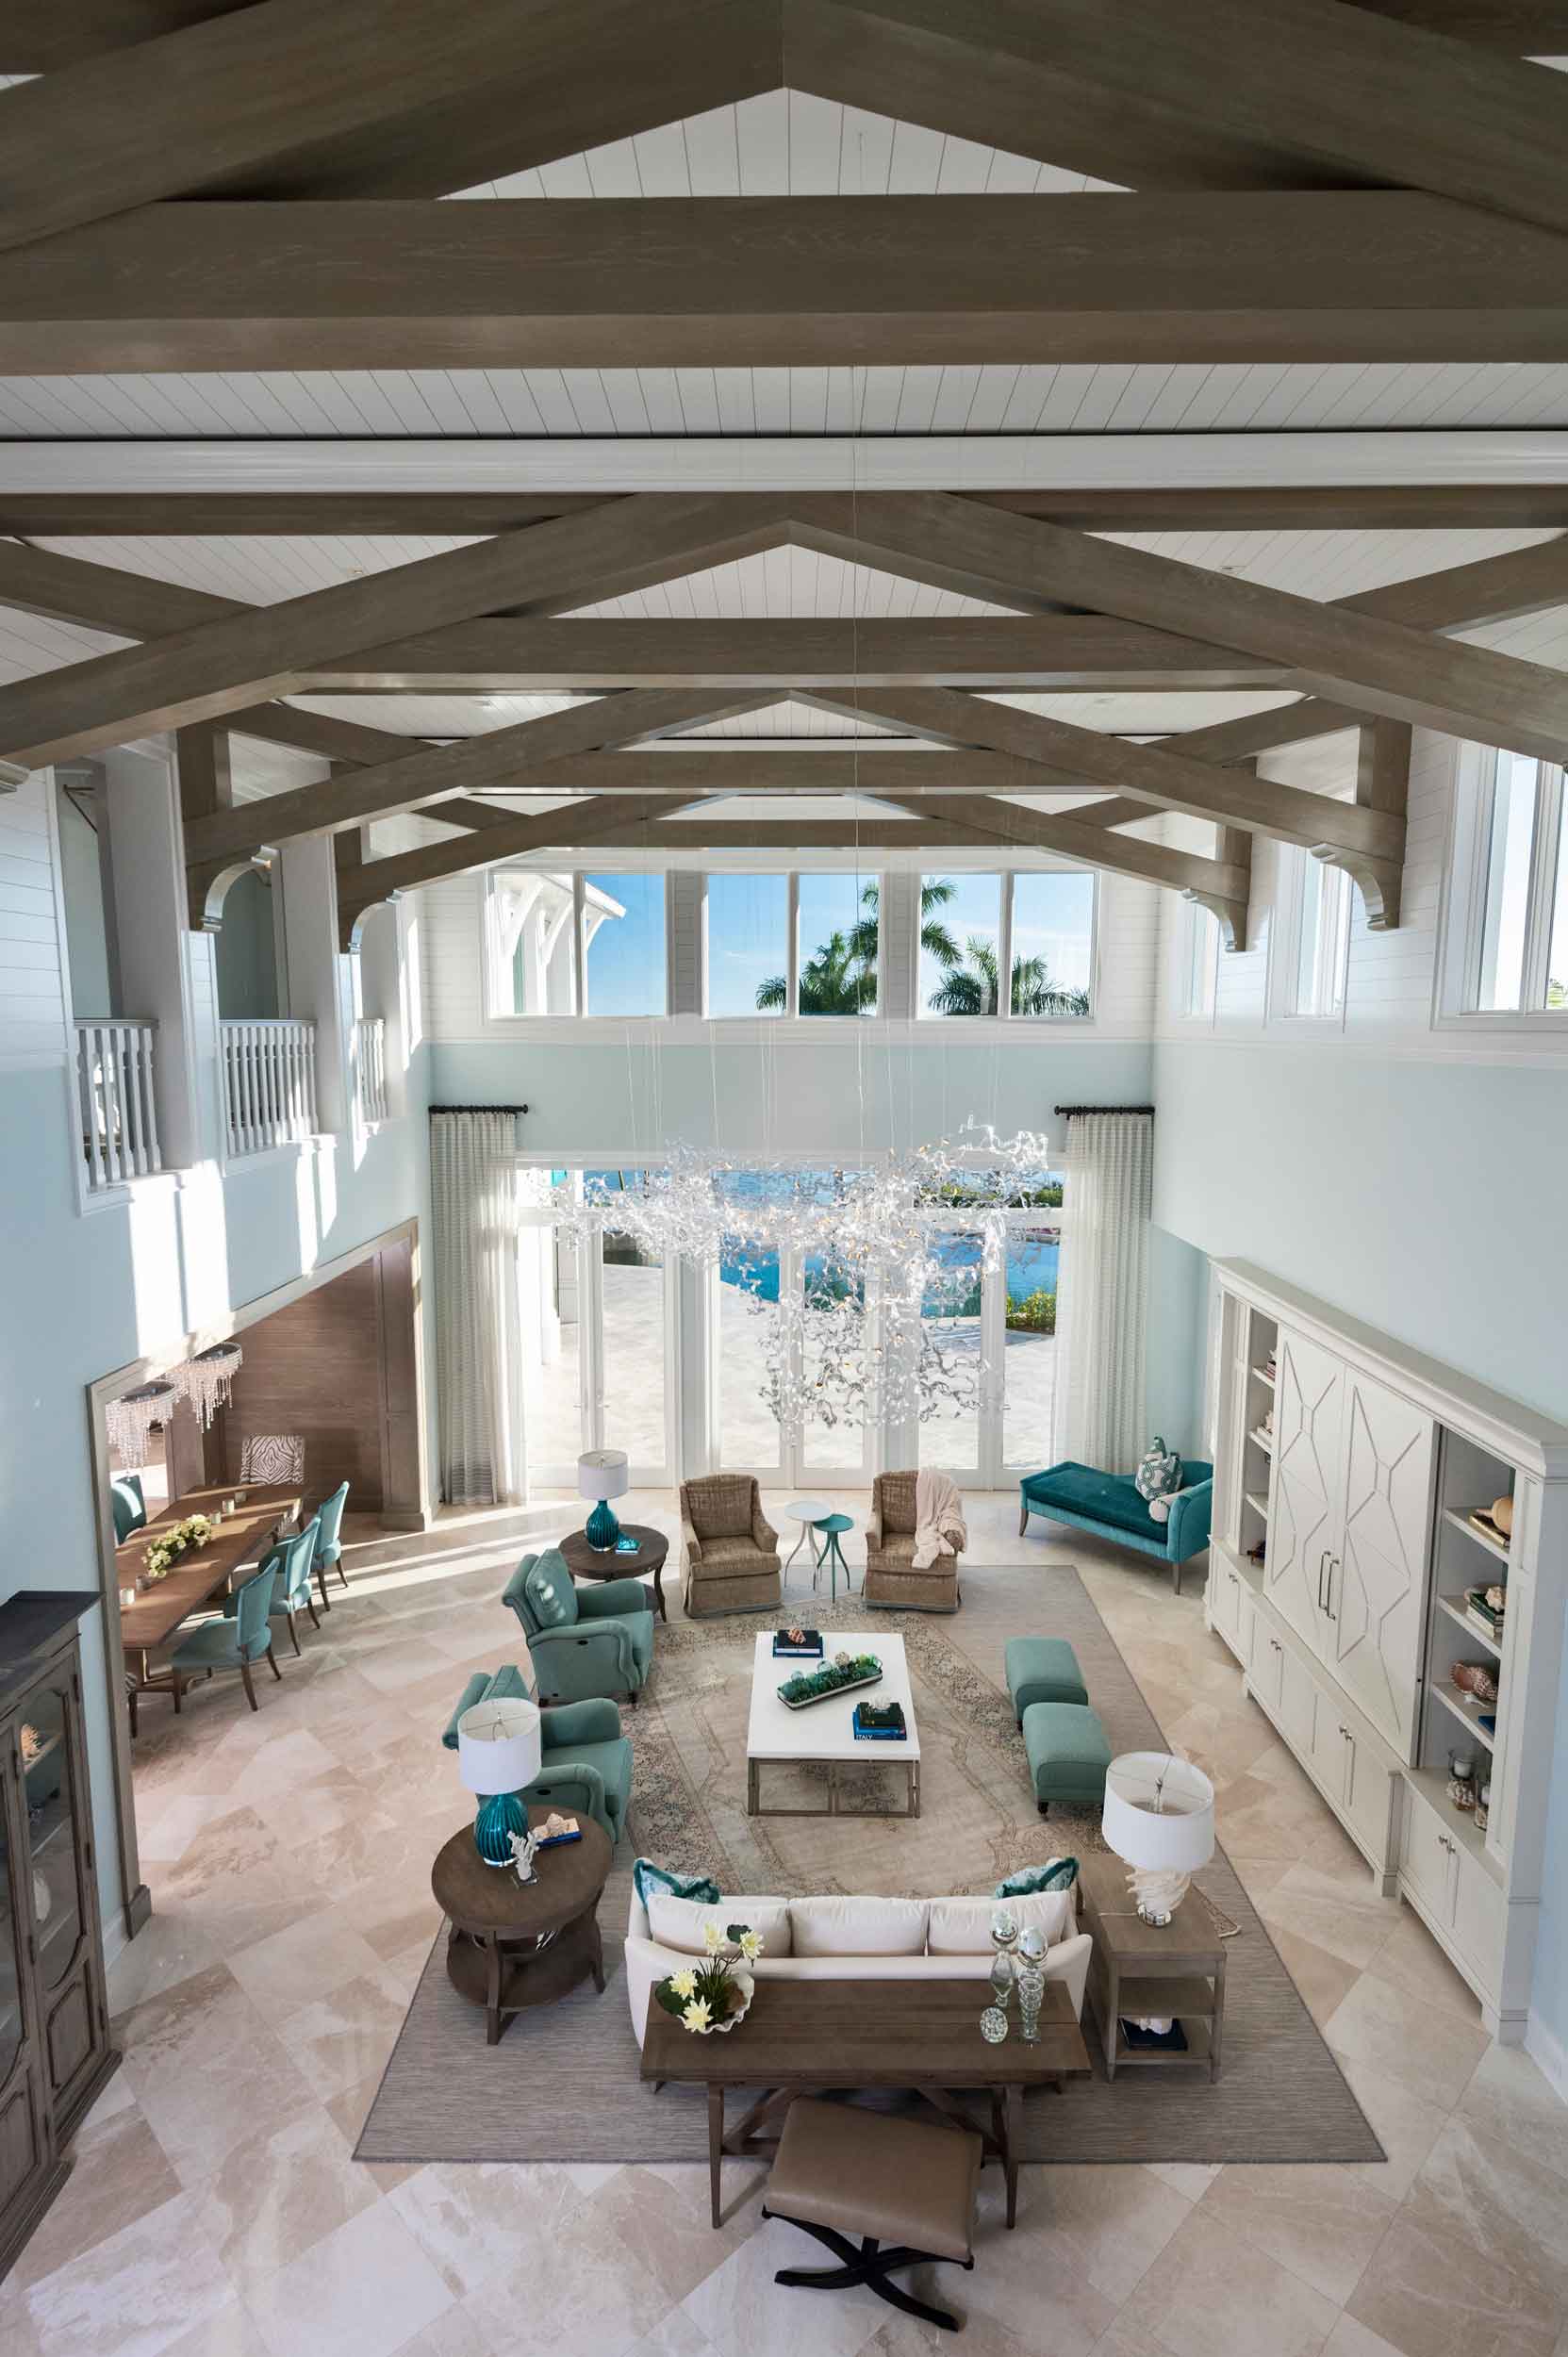 Ceiling Features from Premier Home Finishes